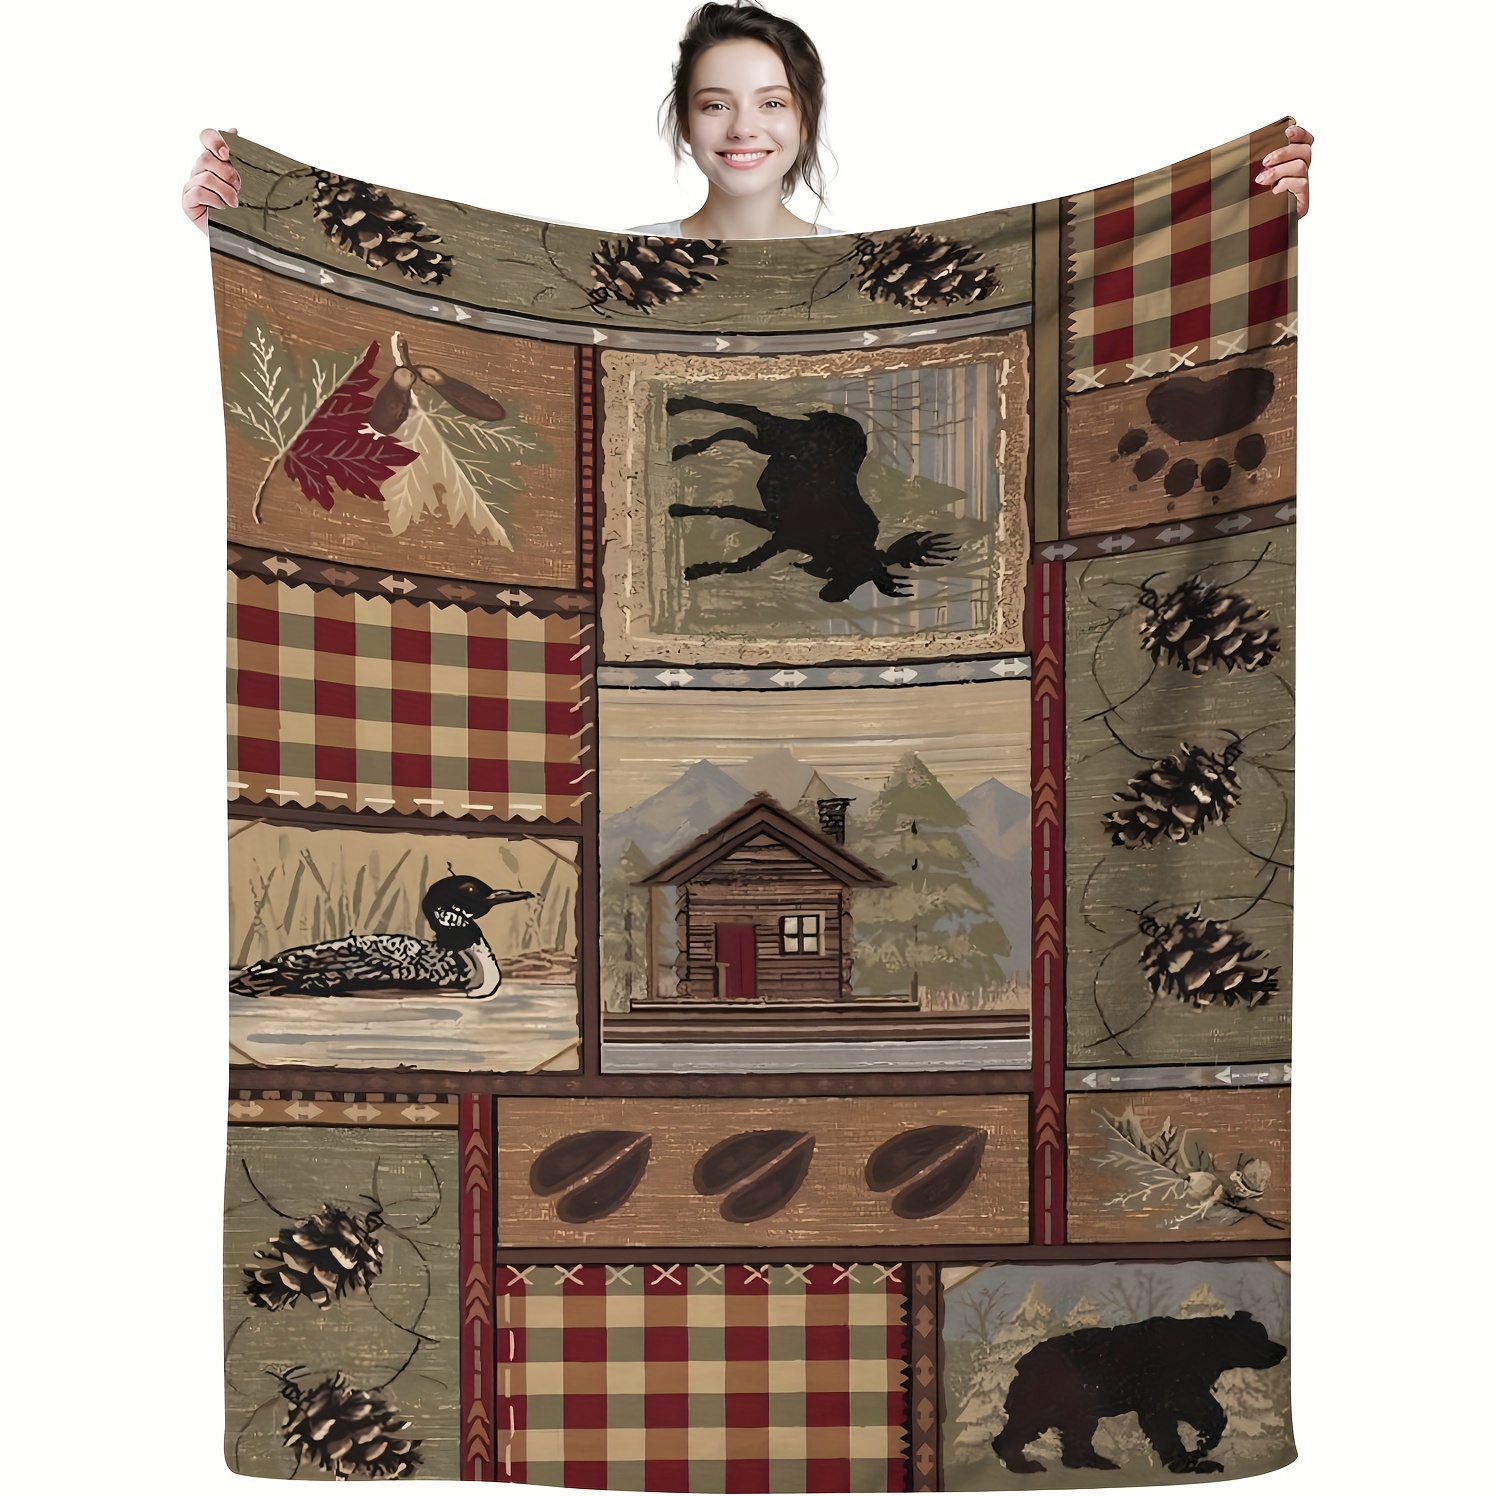 

Style Knitted Polyester Throw Blanket With Rustic Wildlife Patchwork Pattern – Cozy All-season Flannel Fleece With Cabin, Bear, Duck, And Pinecone Motifs For Animal Enthusiasts